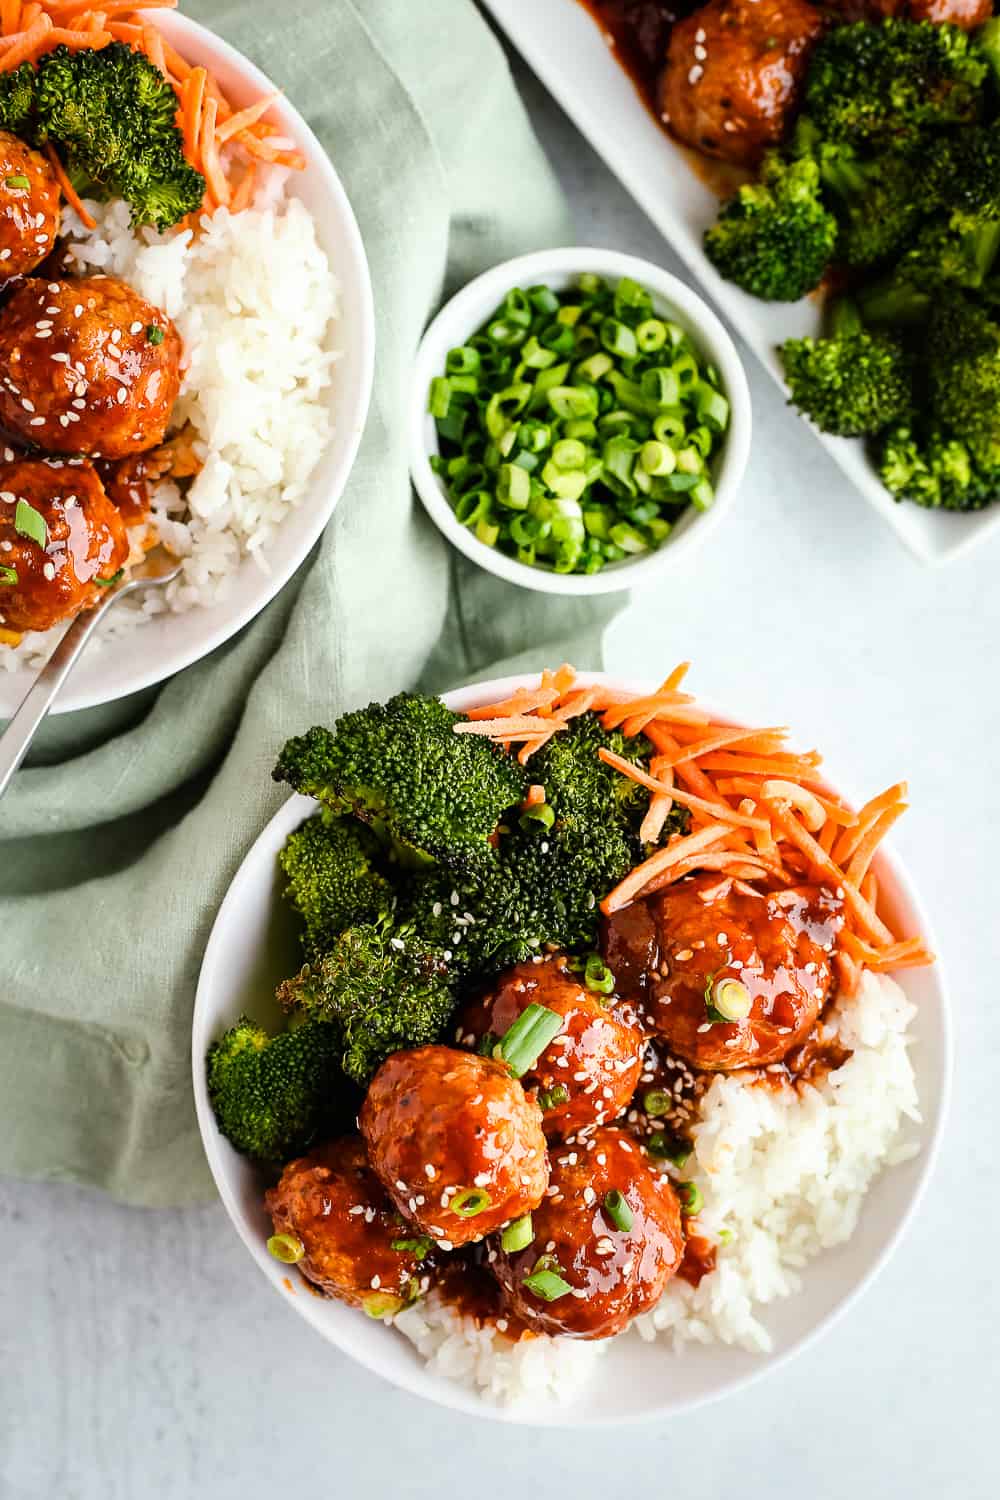 An overhead view of a spicy turkey meatball recipe in the form of rice bowls with roasted broccoli, carrots, and sweet and spicy turkey meatballs